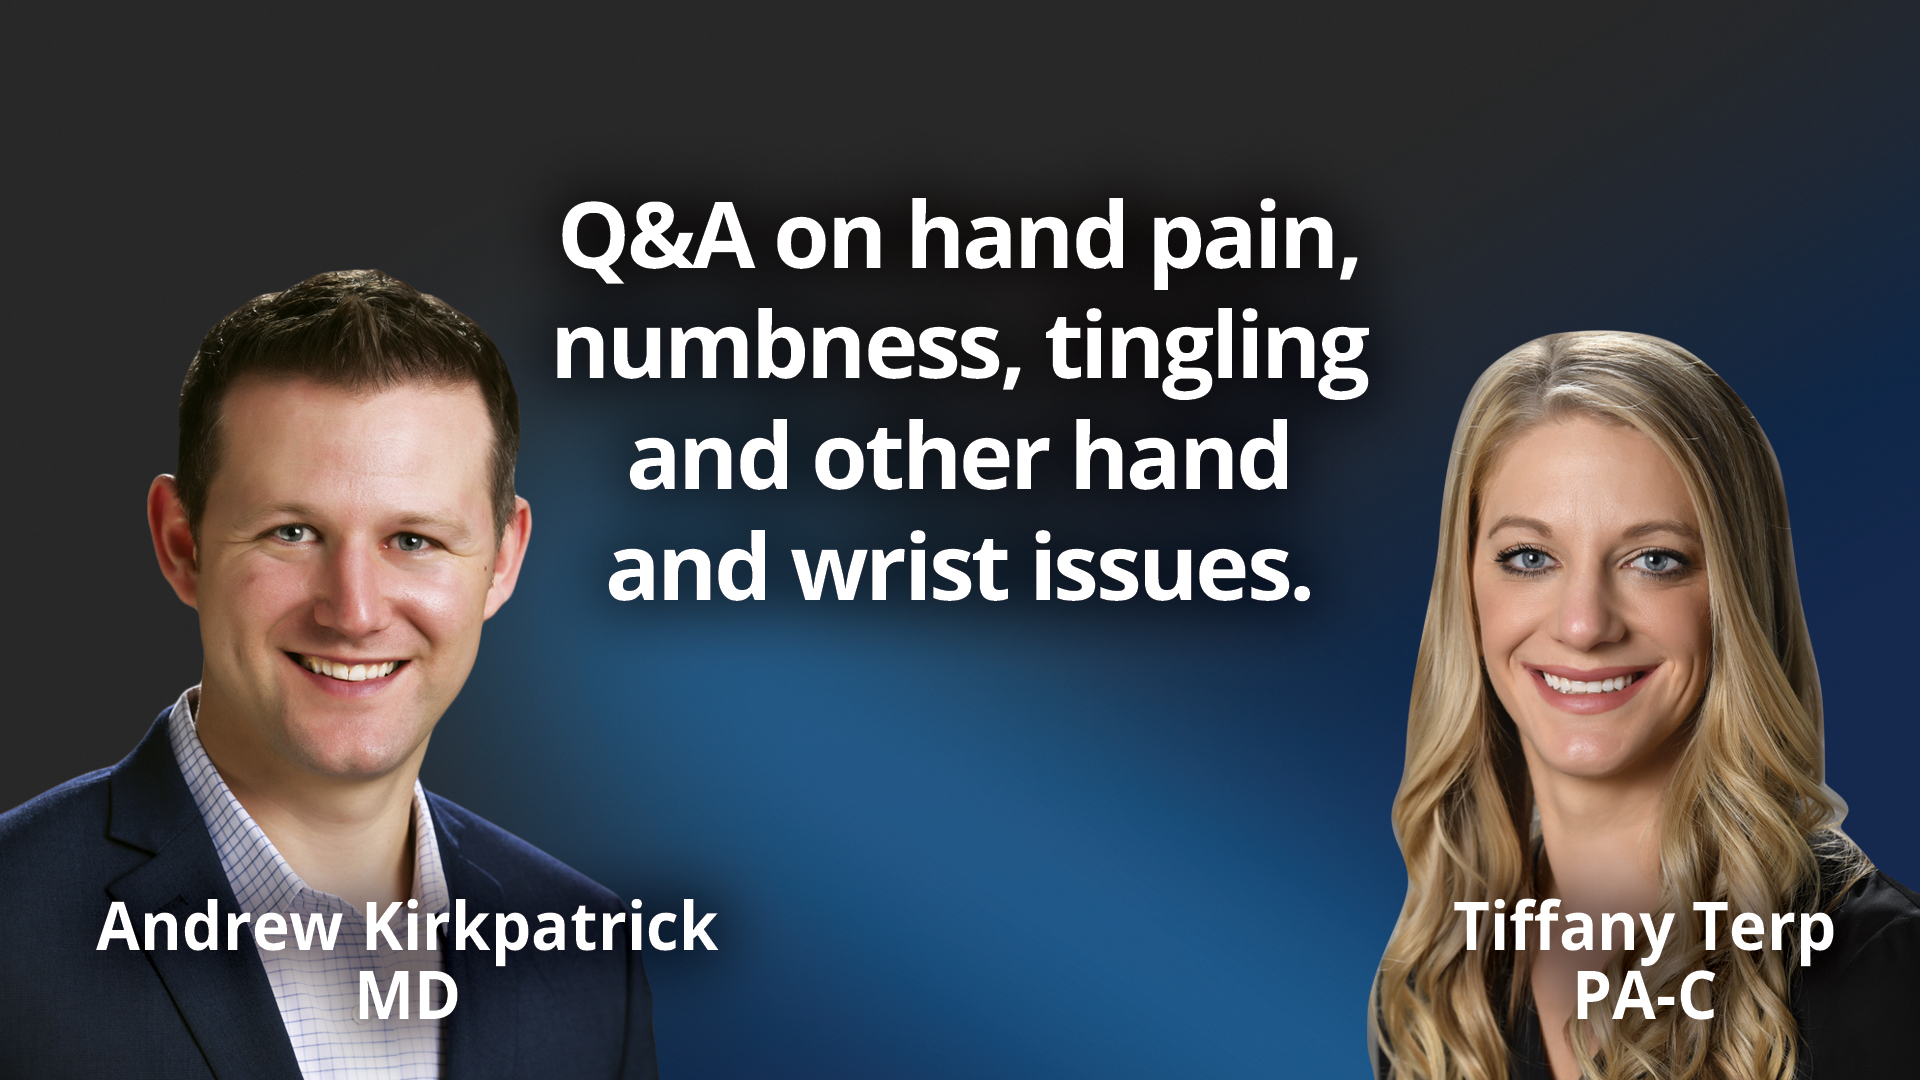 Hand pain, numbness, tingling? There’s help